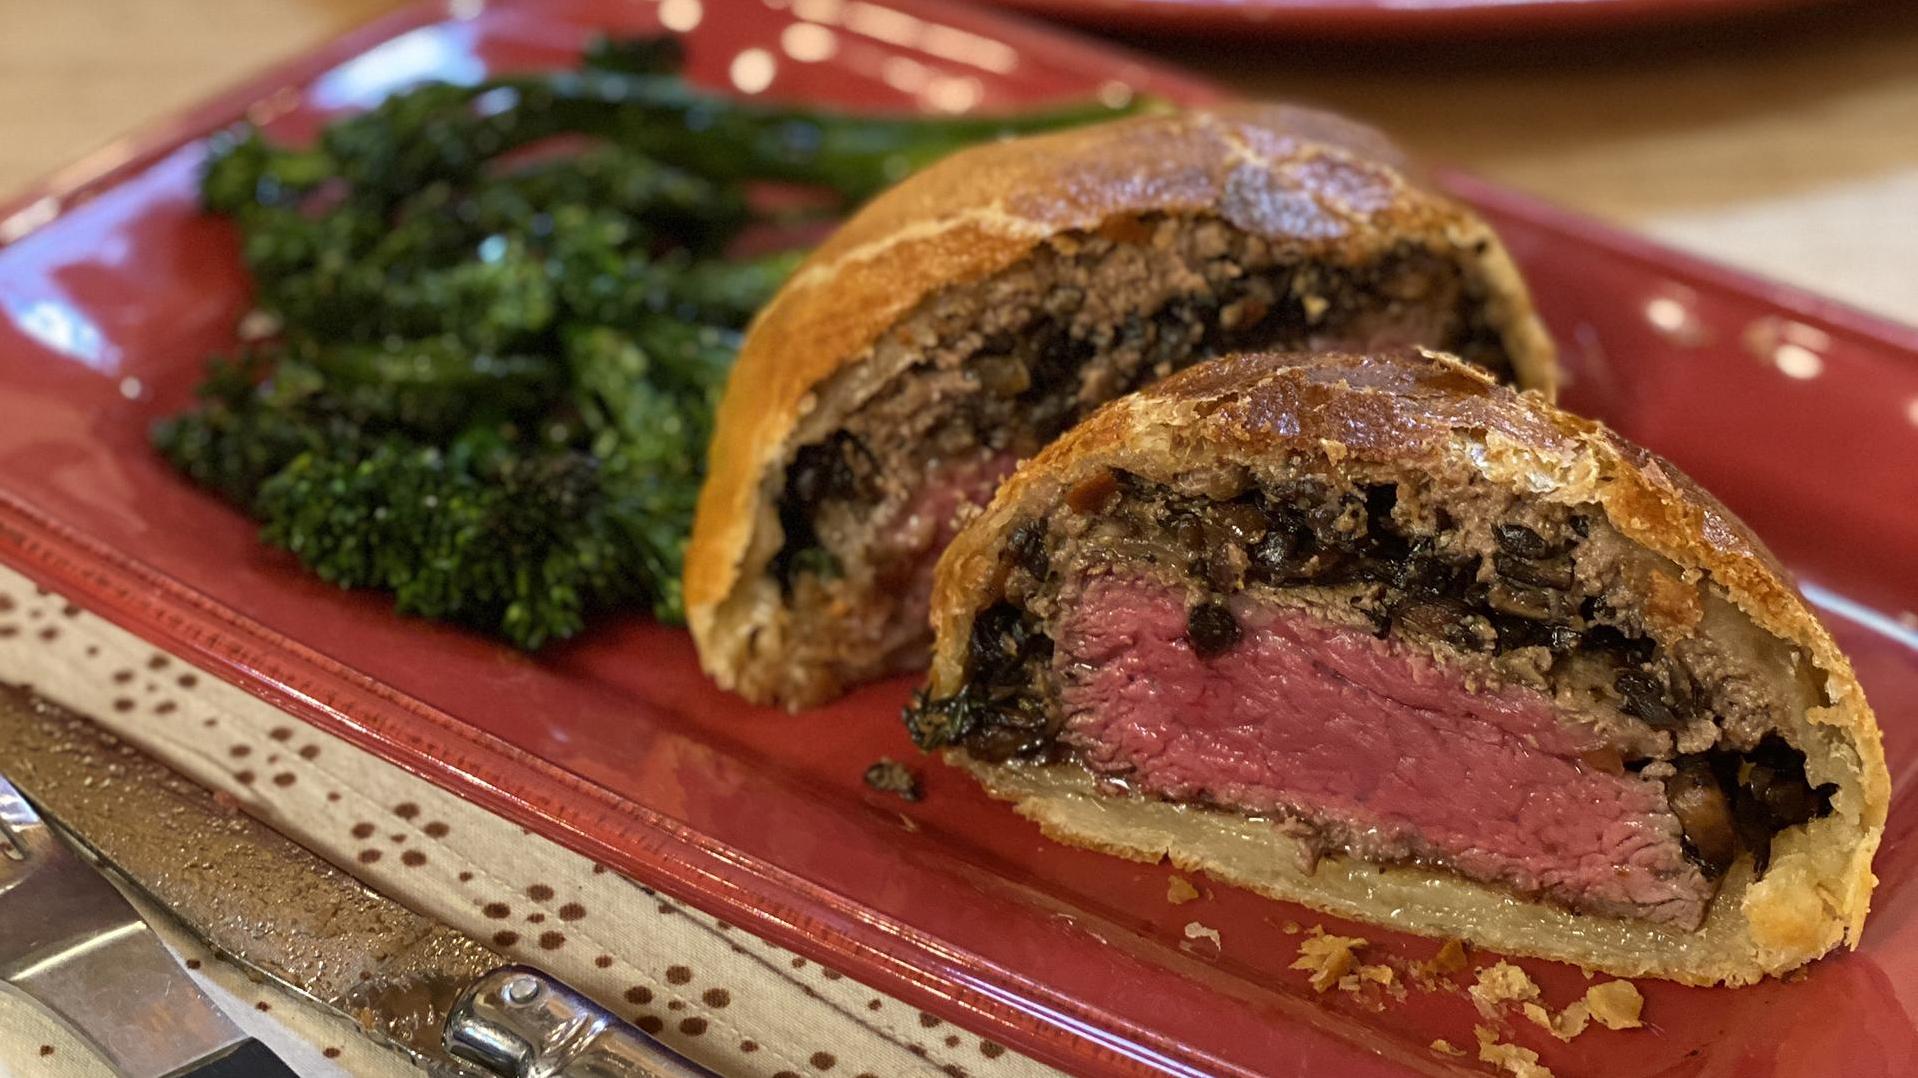  Can't go wrong with beef, mushrooms, and buttery pastry.